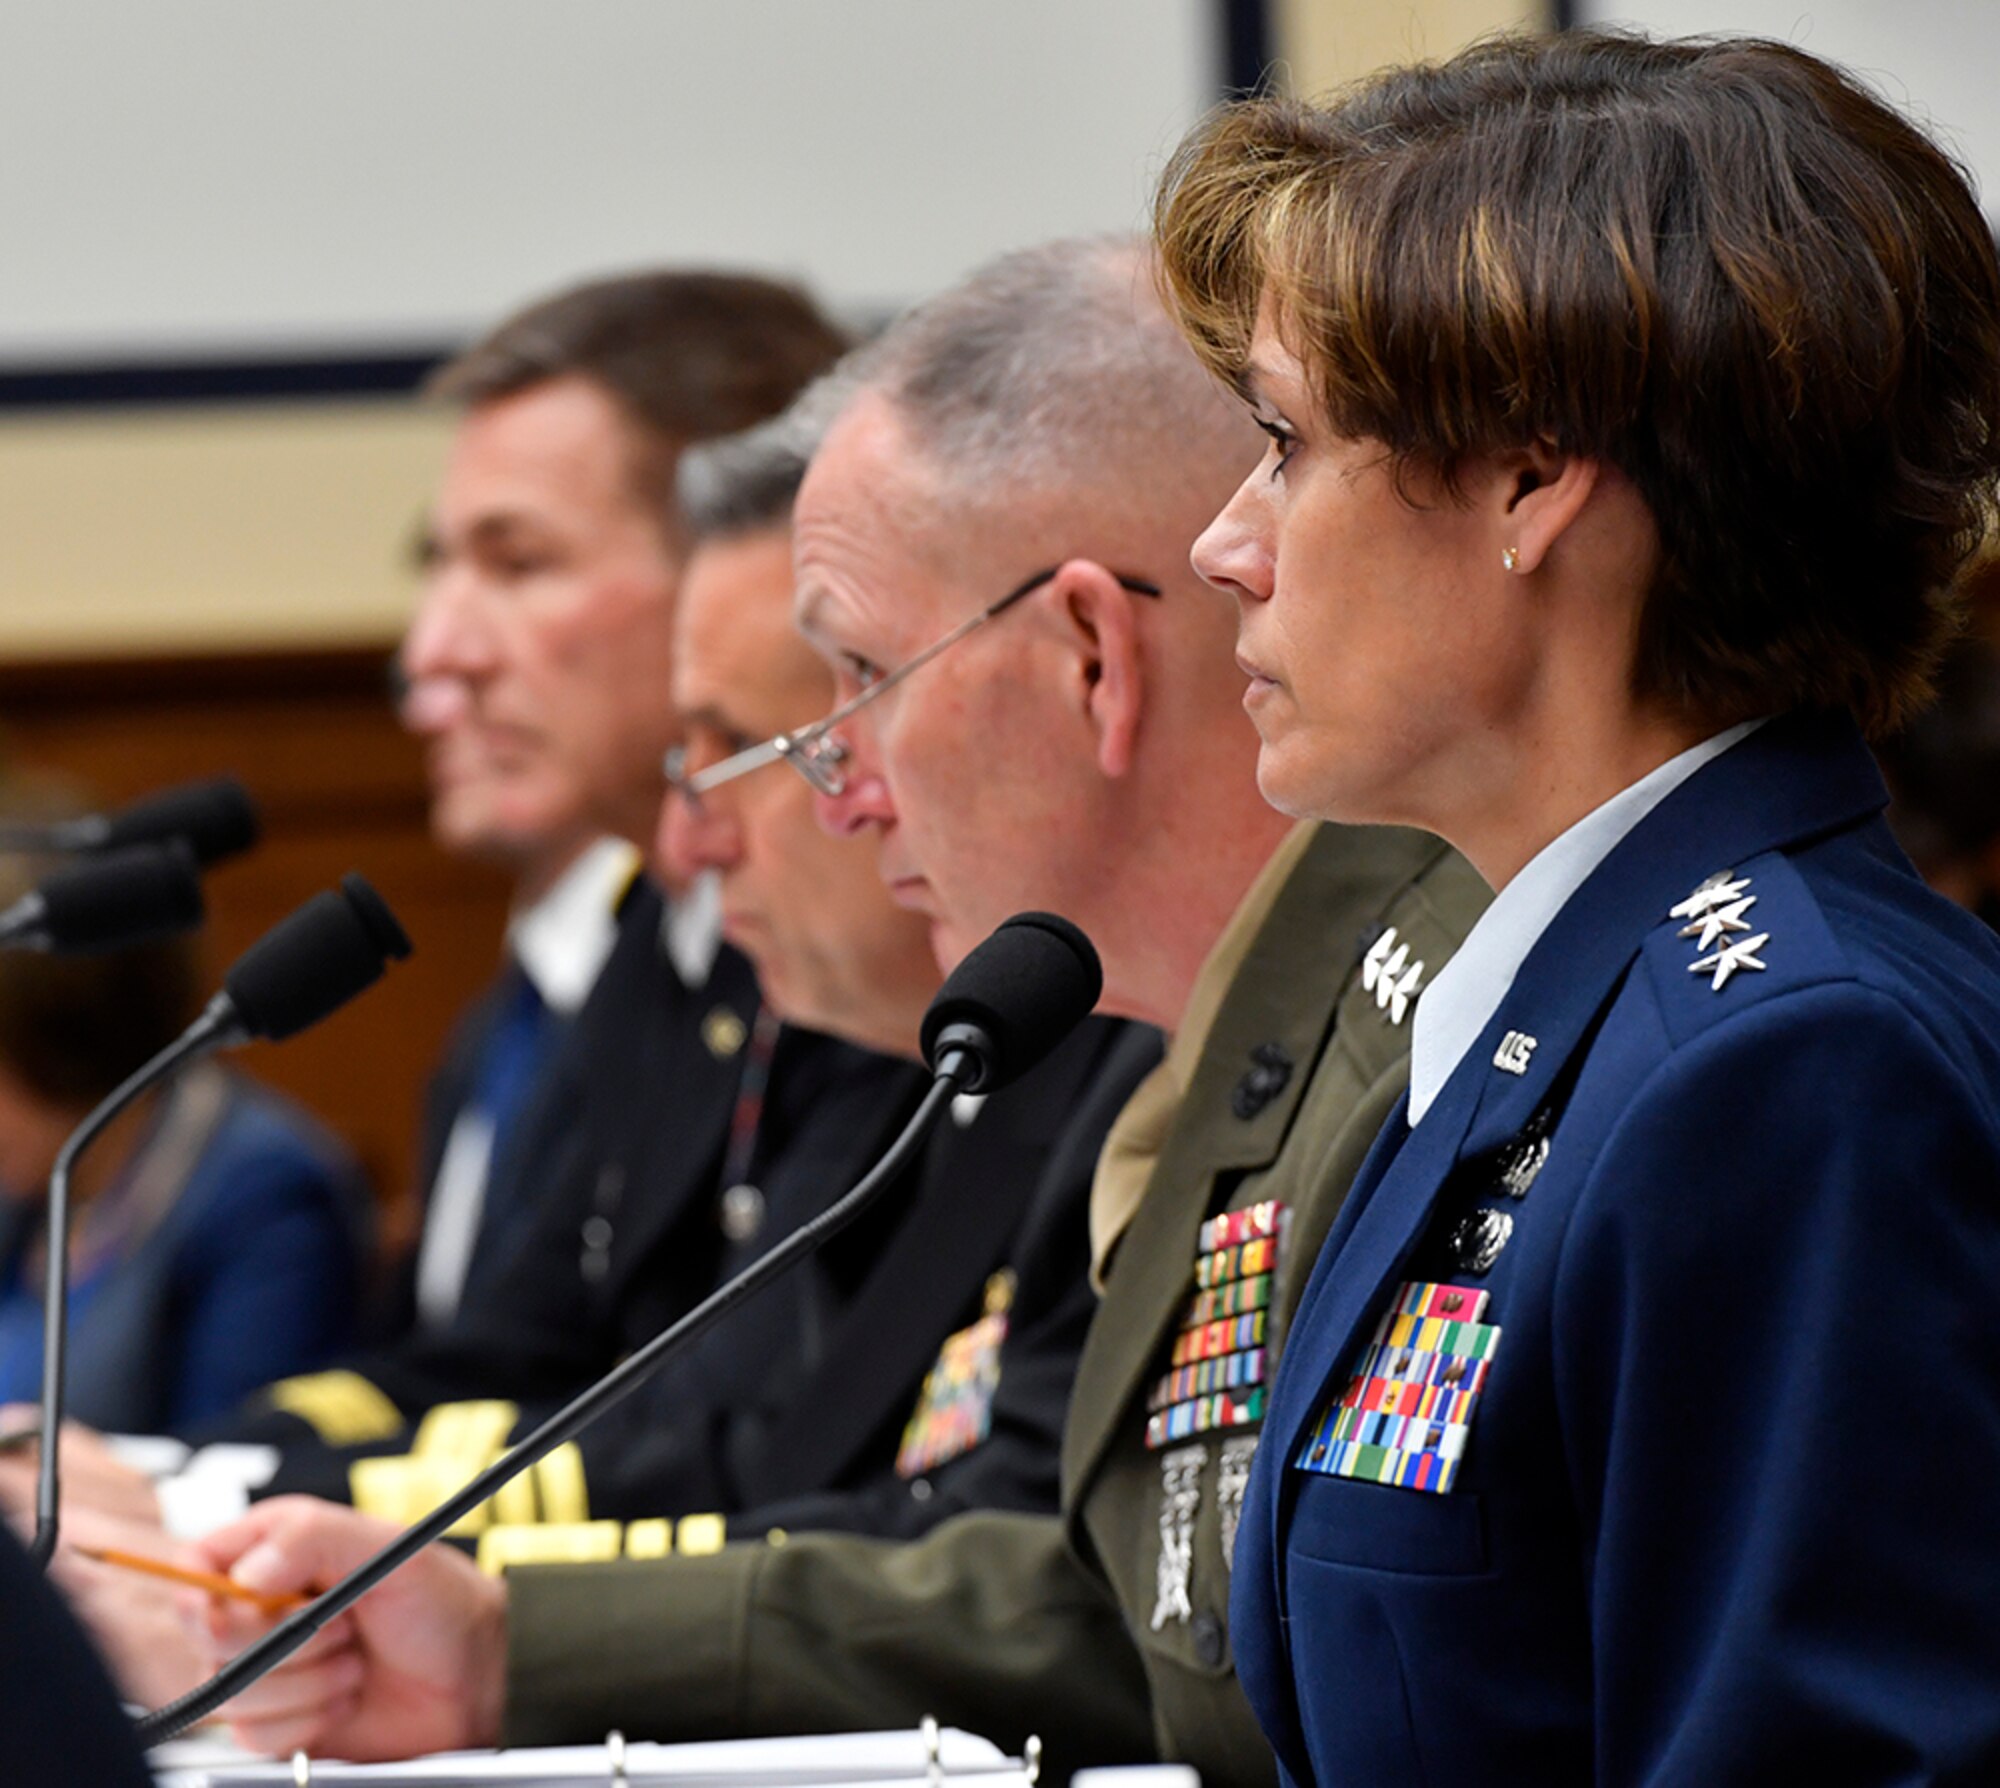 Lt. Gen. Gina Grosso, the Air Force deputy chief of staff for manpower and personnel service greets Mike Coffman, the chairman of the Military Personnel Subcommittee before testifying on military personnel posture May 17, 2017, in Washington, D.C. Grosso testified with Marine Corps Lt. Gen. Mark Brilakis, the U.S. Marine Corps deputy commandant for manpower and reserve Affairs; Navy Vice Adm. Robert Burke, the U.S. Navy Chief of naval personnel; and Army Maj. Gen. Erik Peterson, the U.S. Army director of Army aviation. (U.S. Air Force photo/Wayne A. Clark)